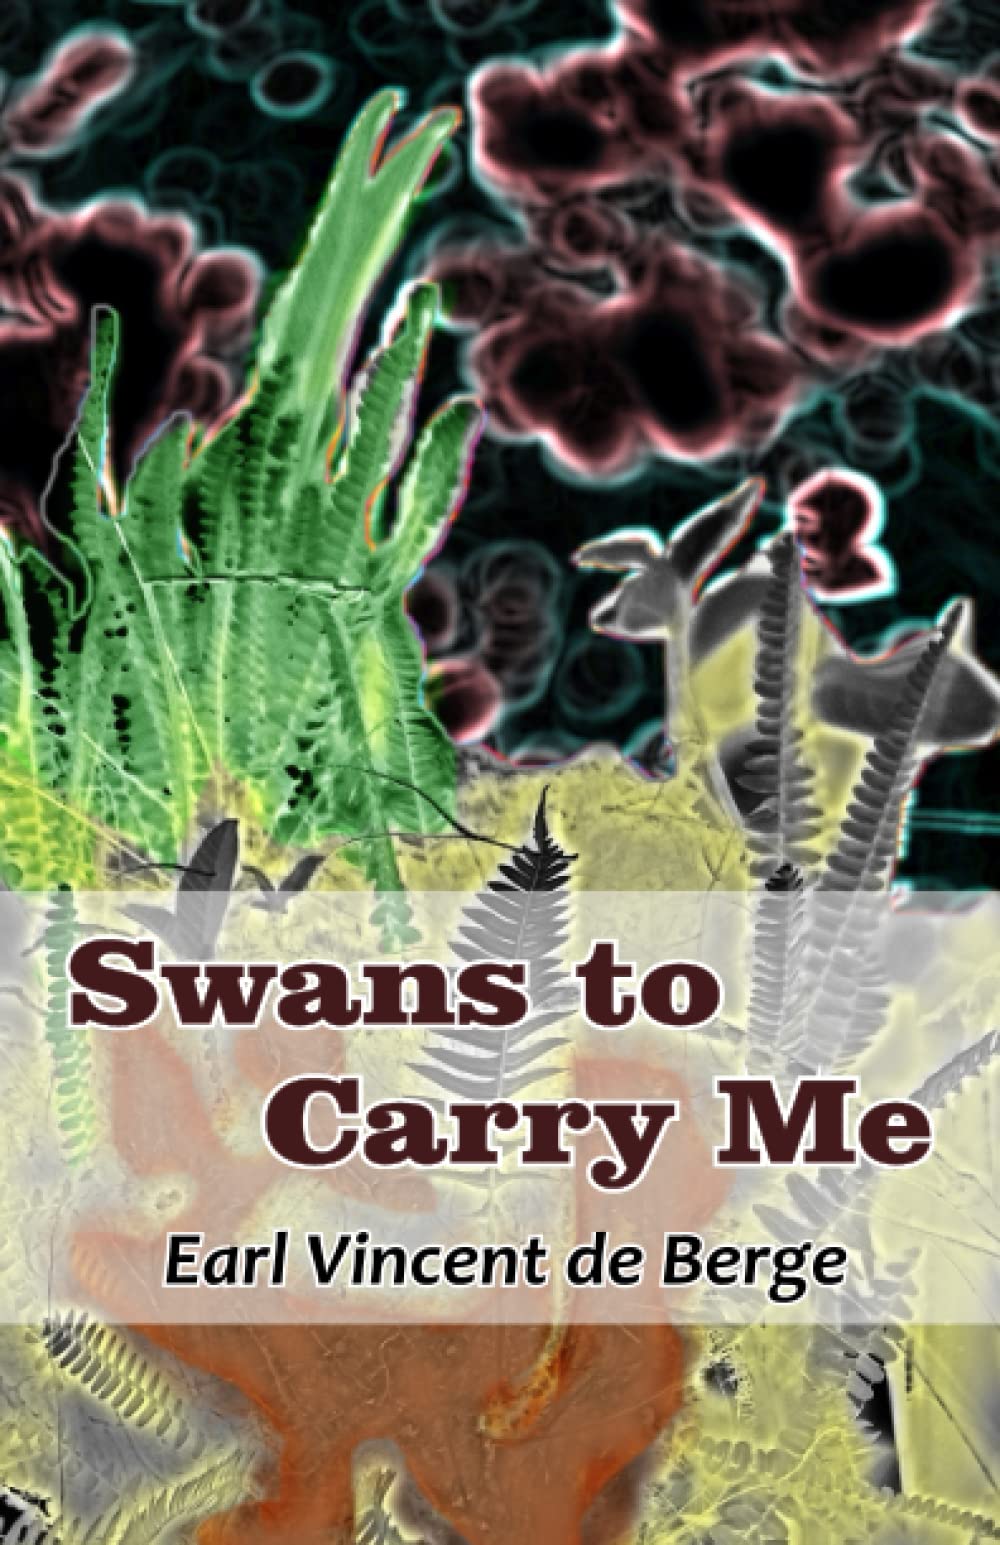 Swans to Carry Me by Earl Vincent de Berge